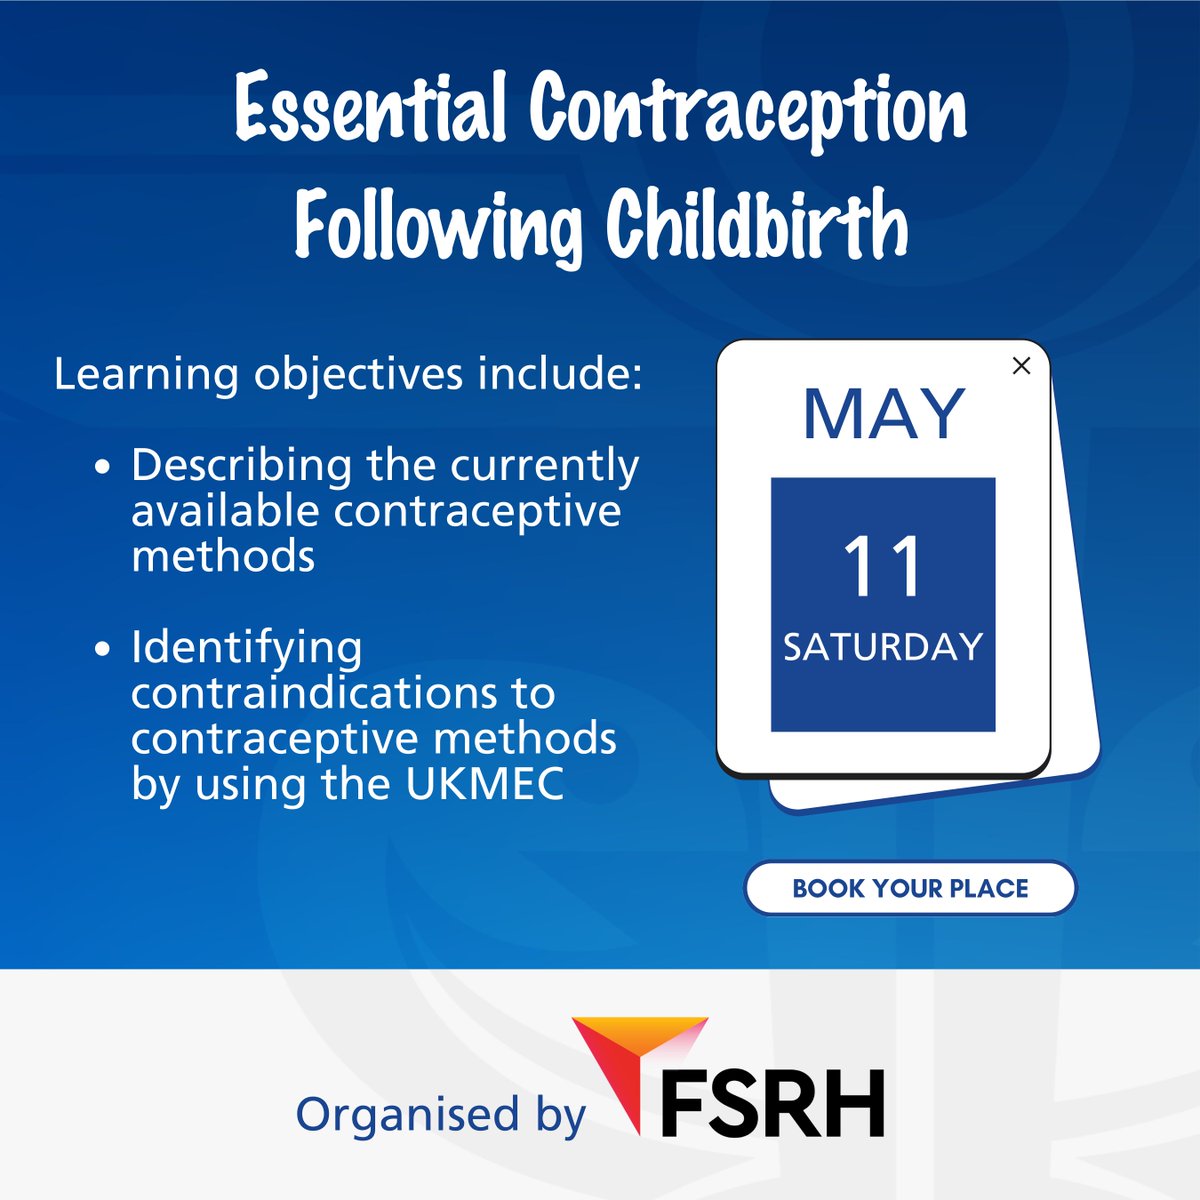 Are you involved in postnatal care and looking to expand your knowledge and skills in sexual and reproductive health? Then the @FSRH_UK 'Essential Contraception following Childbirth' course is perfect for you. To book your place, visit: bit.ly/4aSgB0D